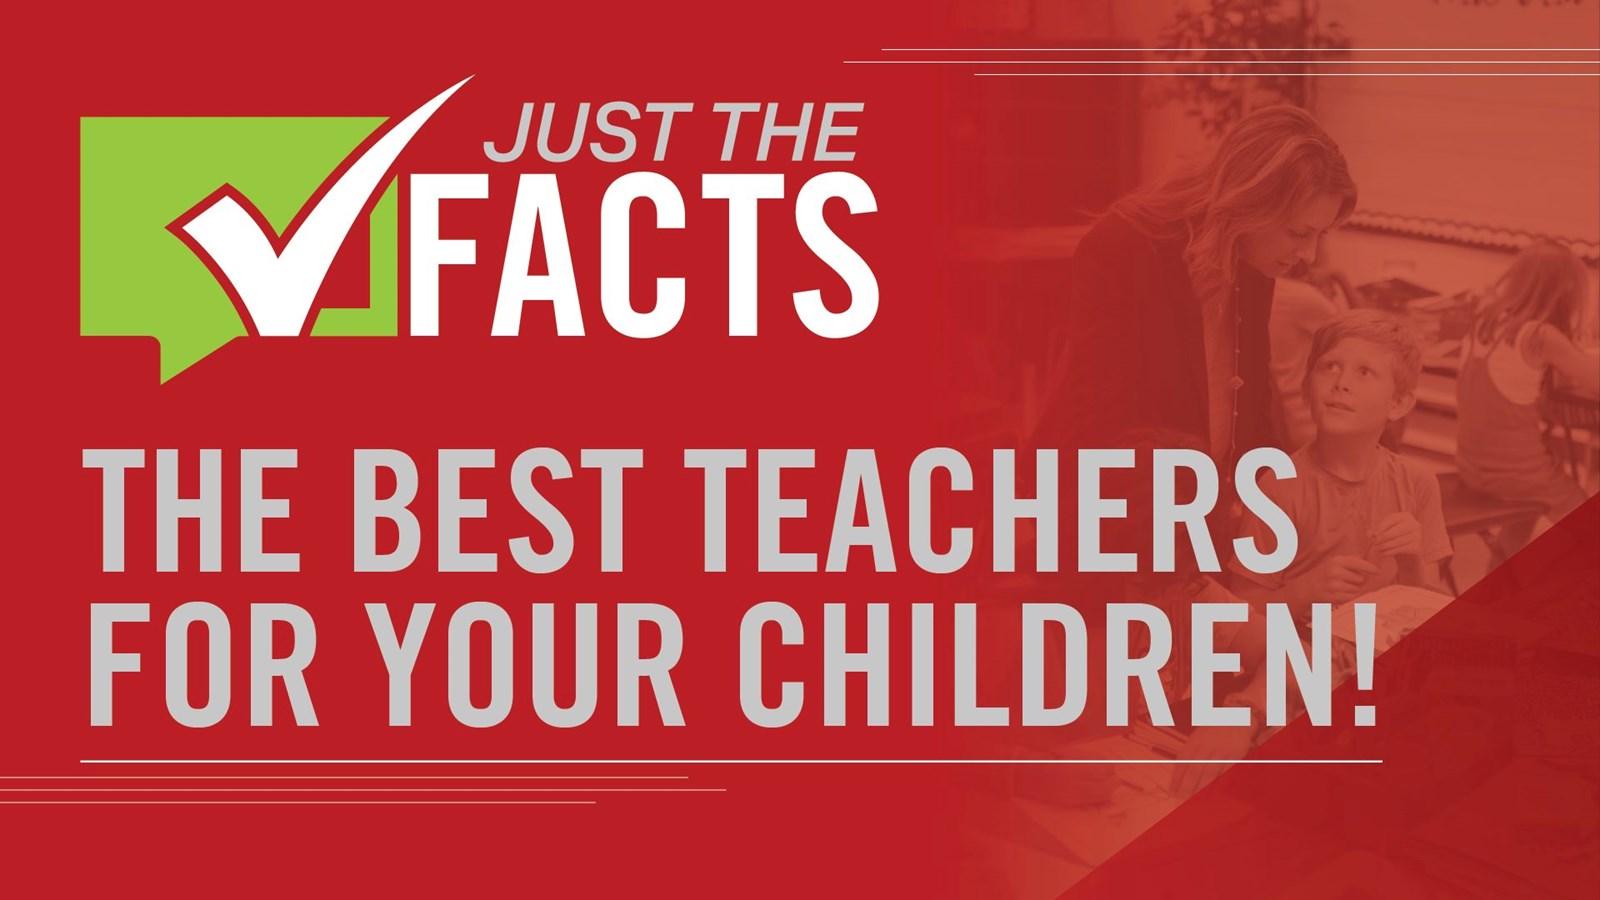 Just the Facts: The Best Teachers for Your Children!